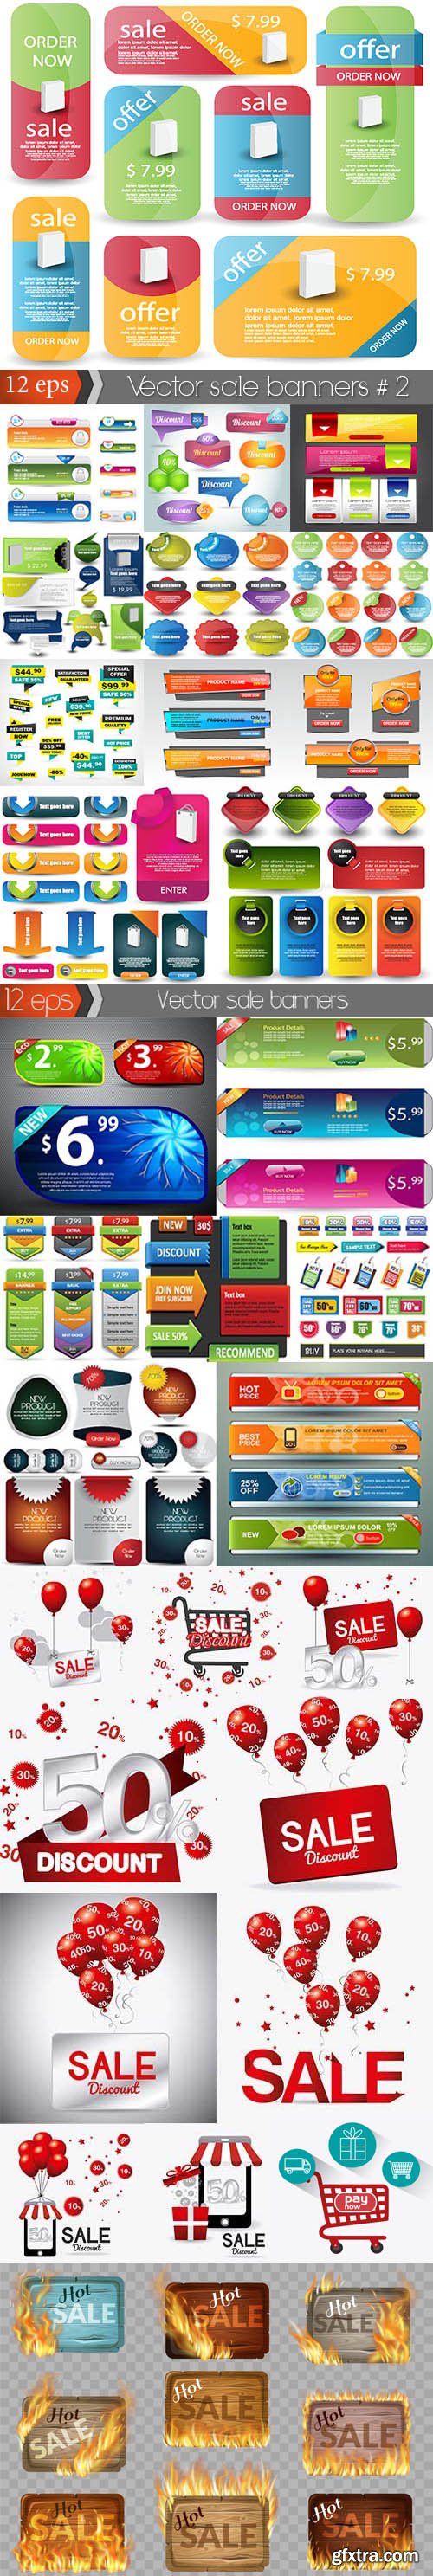 206 Sales Web Elements Collection in Vector